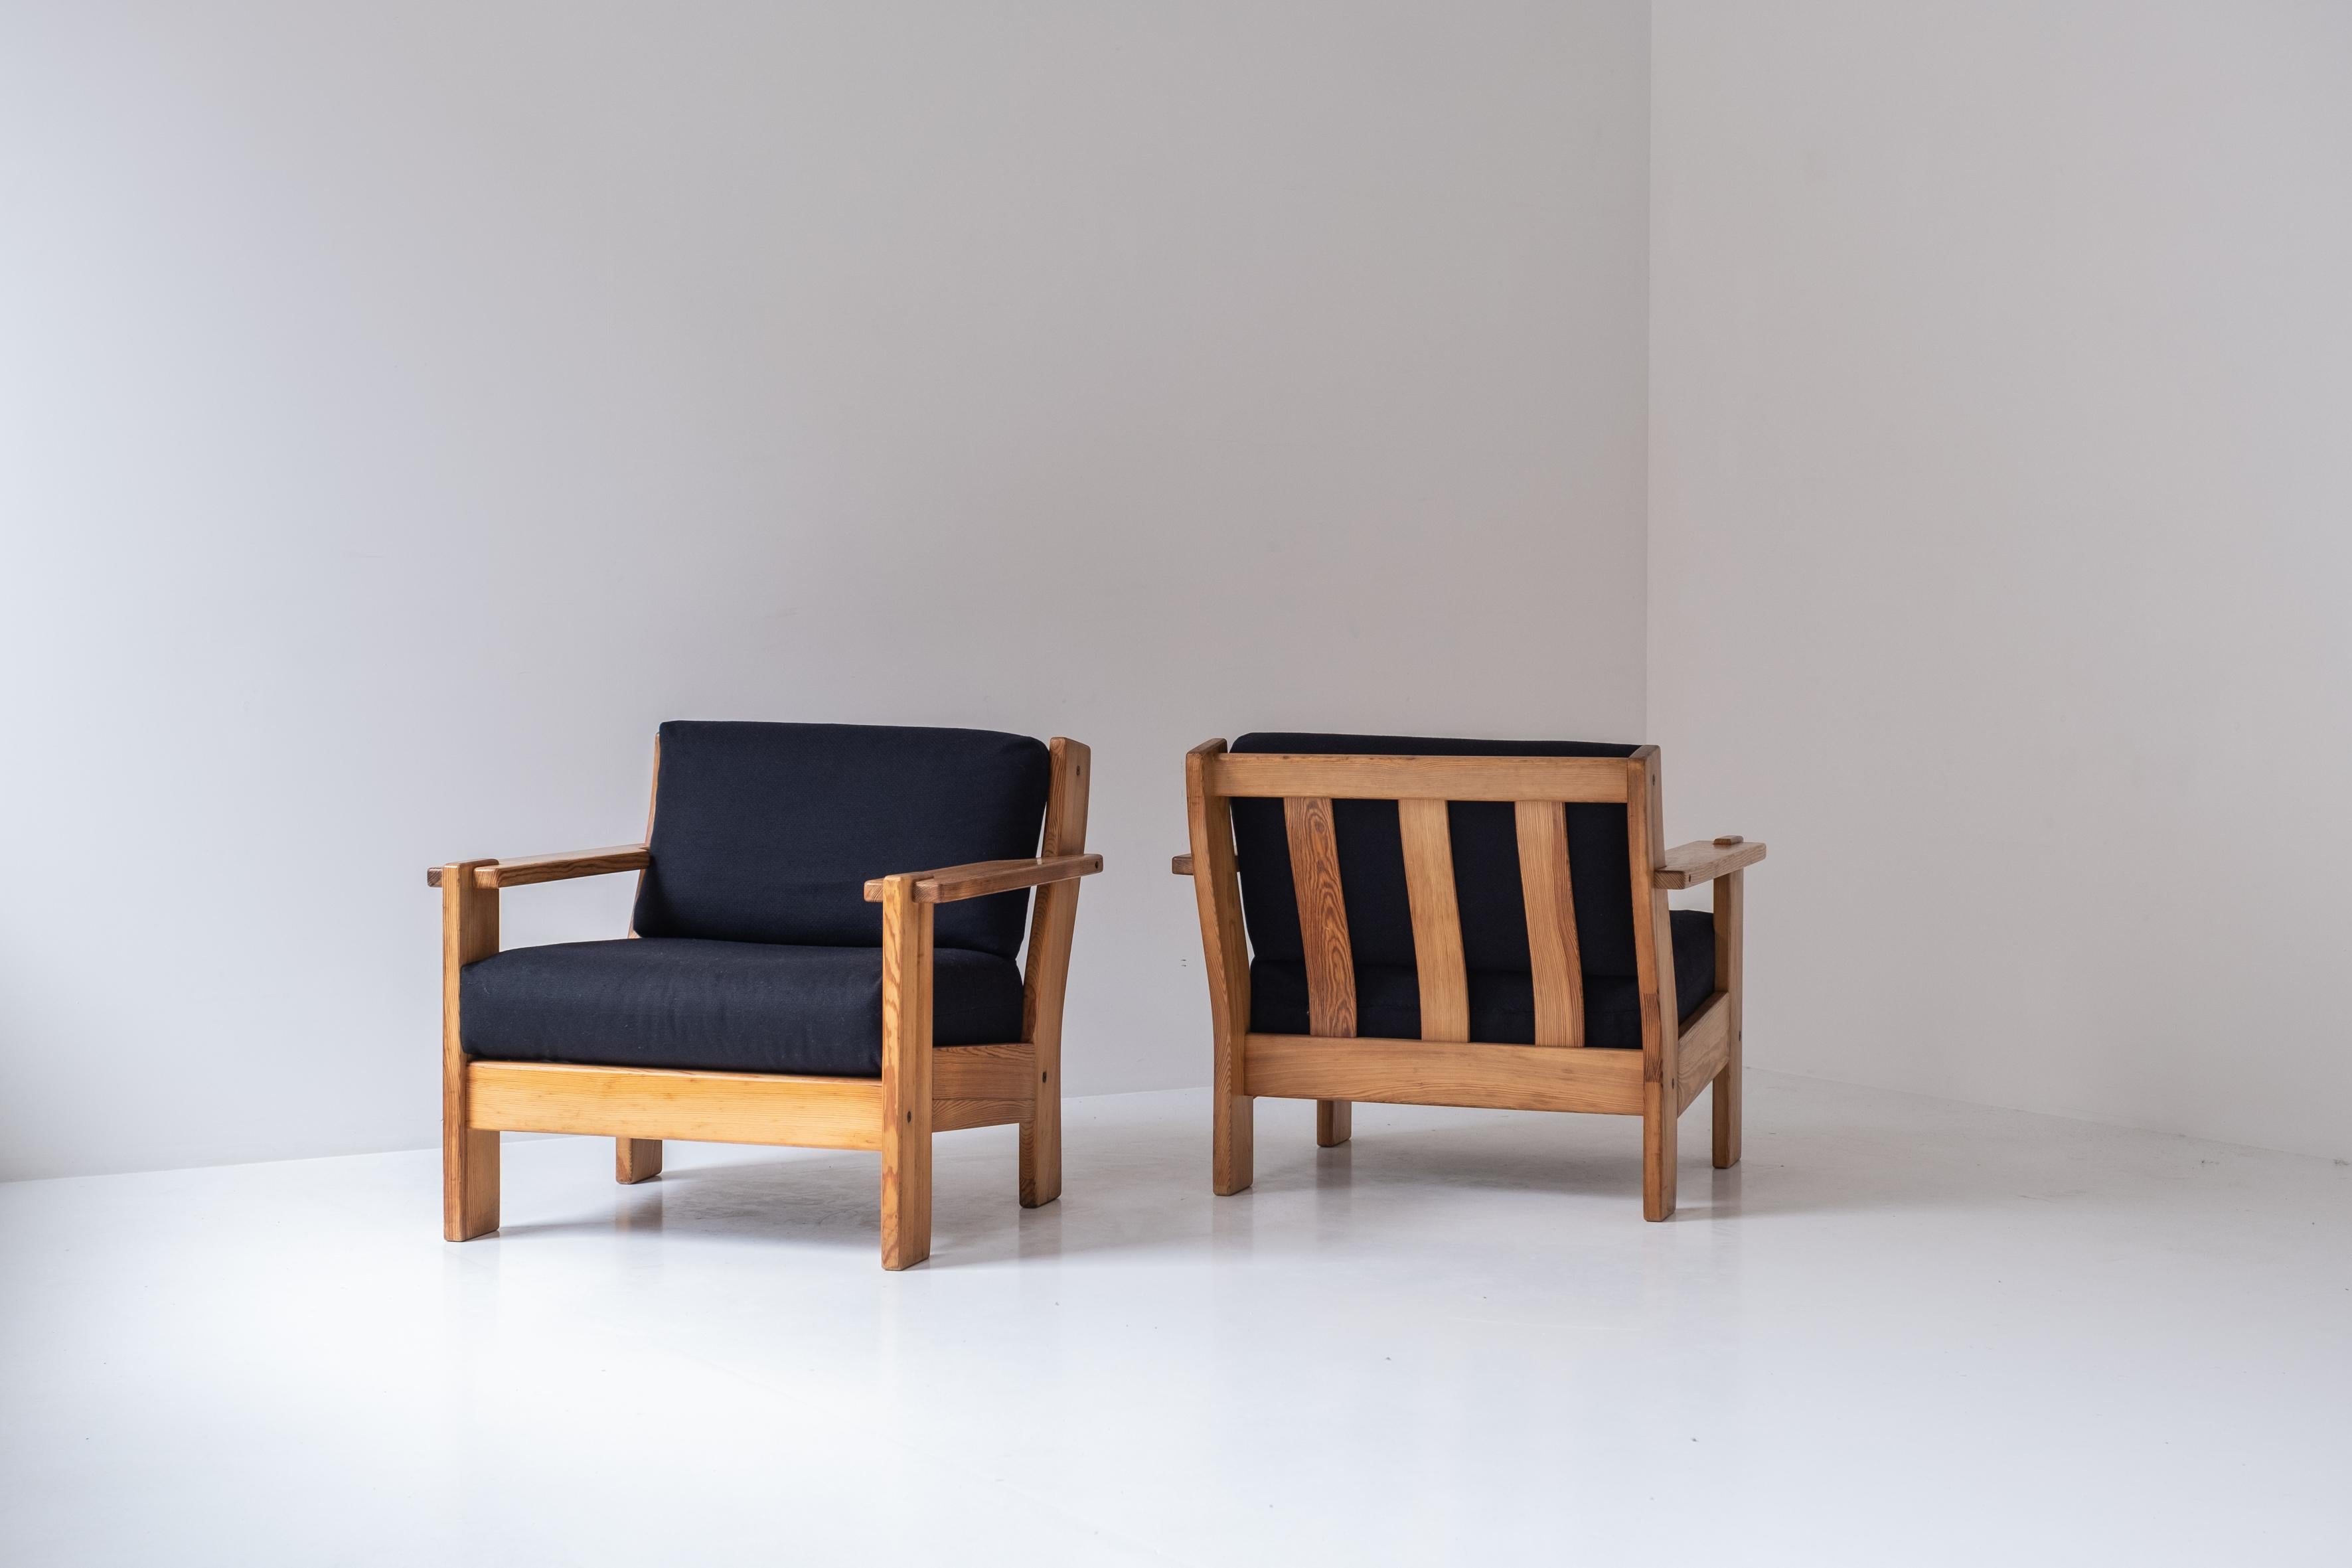 Set of two easy chairs from France, dating from the 1960s. This pair is freshly re-upholstered in a dark blue fabric upholstery. The frame is made out of pine and is in its original well presented condition. Designer (for know) unknown. Restored